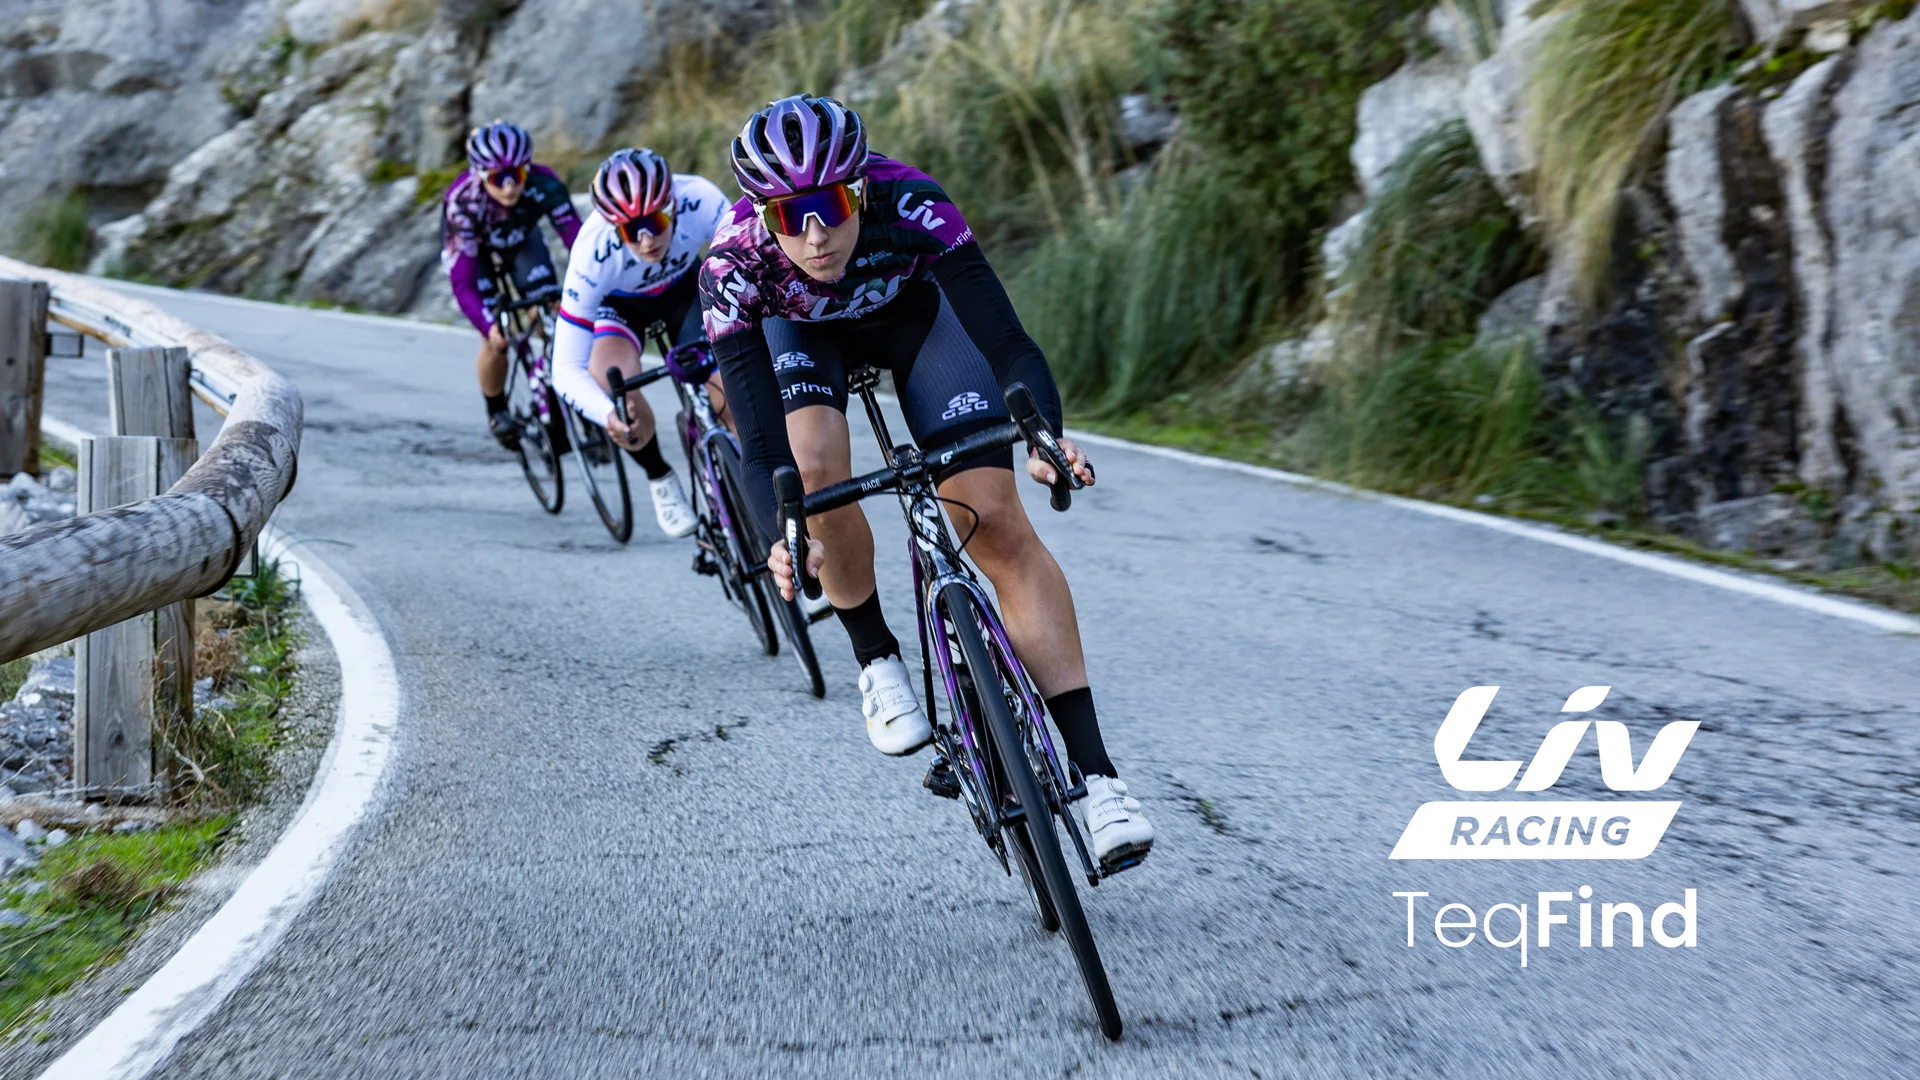 Liv Racing TeqFind Liv Cycling Official site